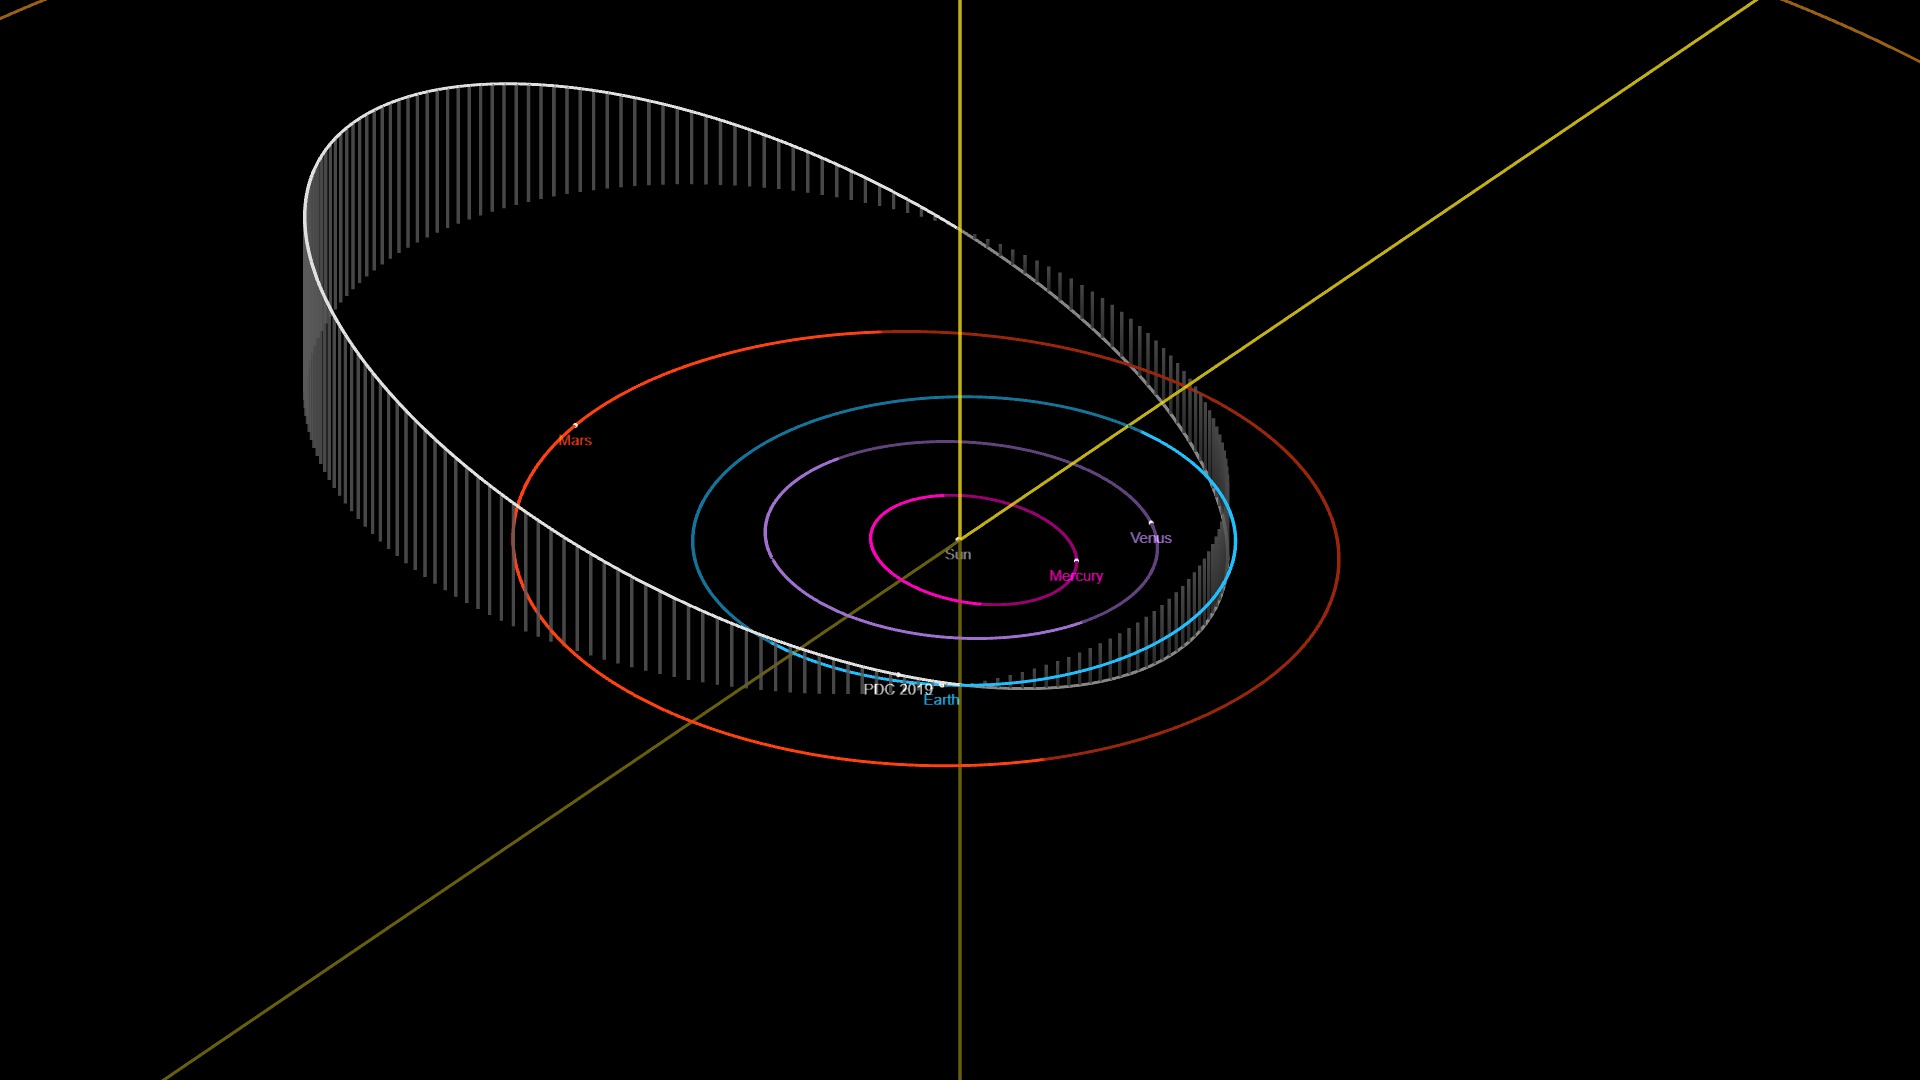 Rolling coverage: Brace for hypothetical asteroid impact – Rocket Science1920 x 1080